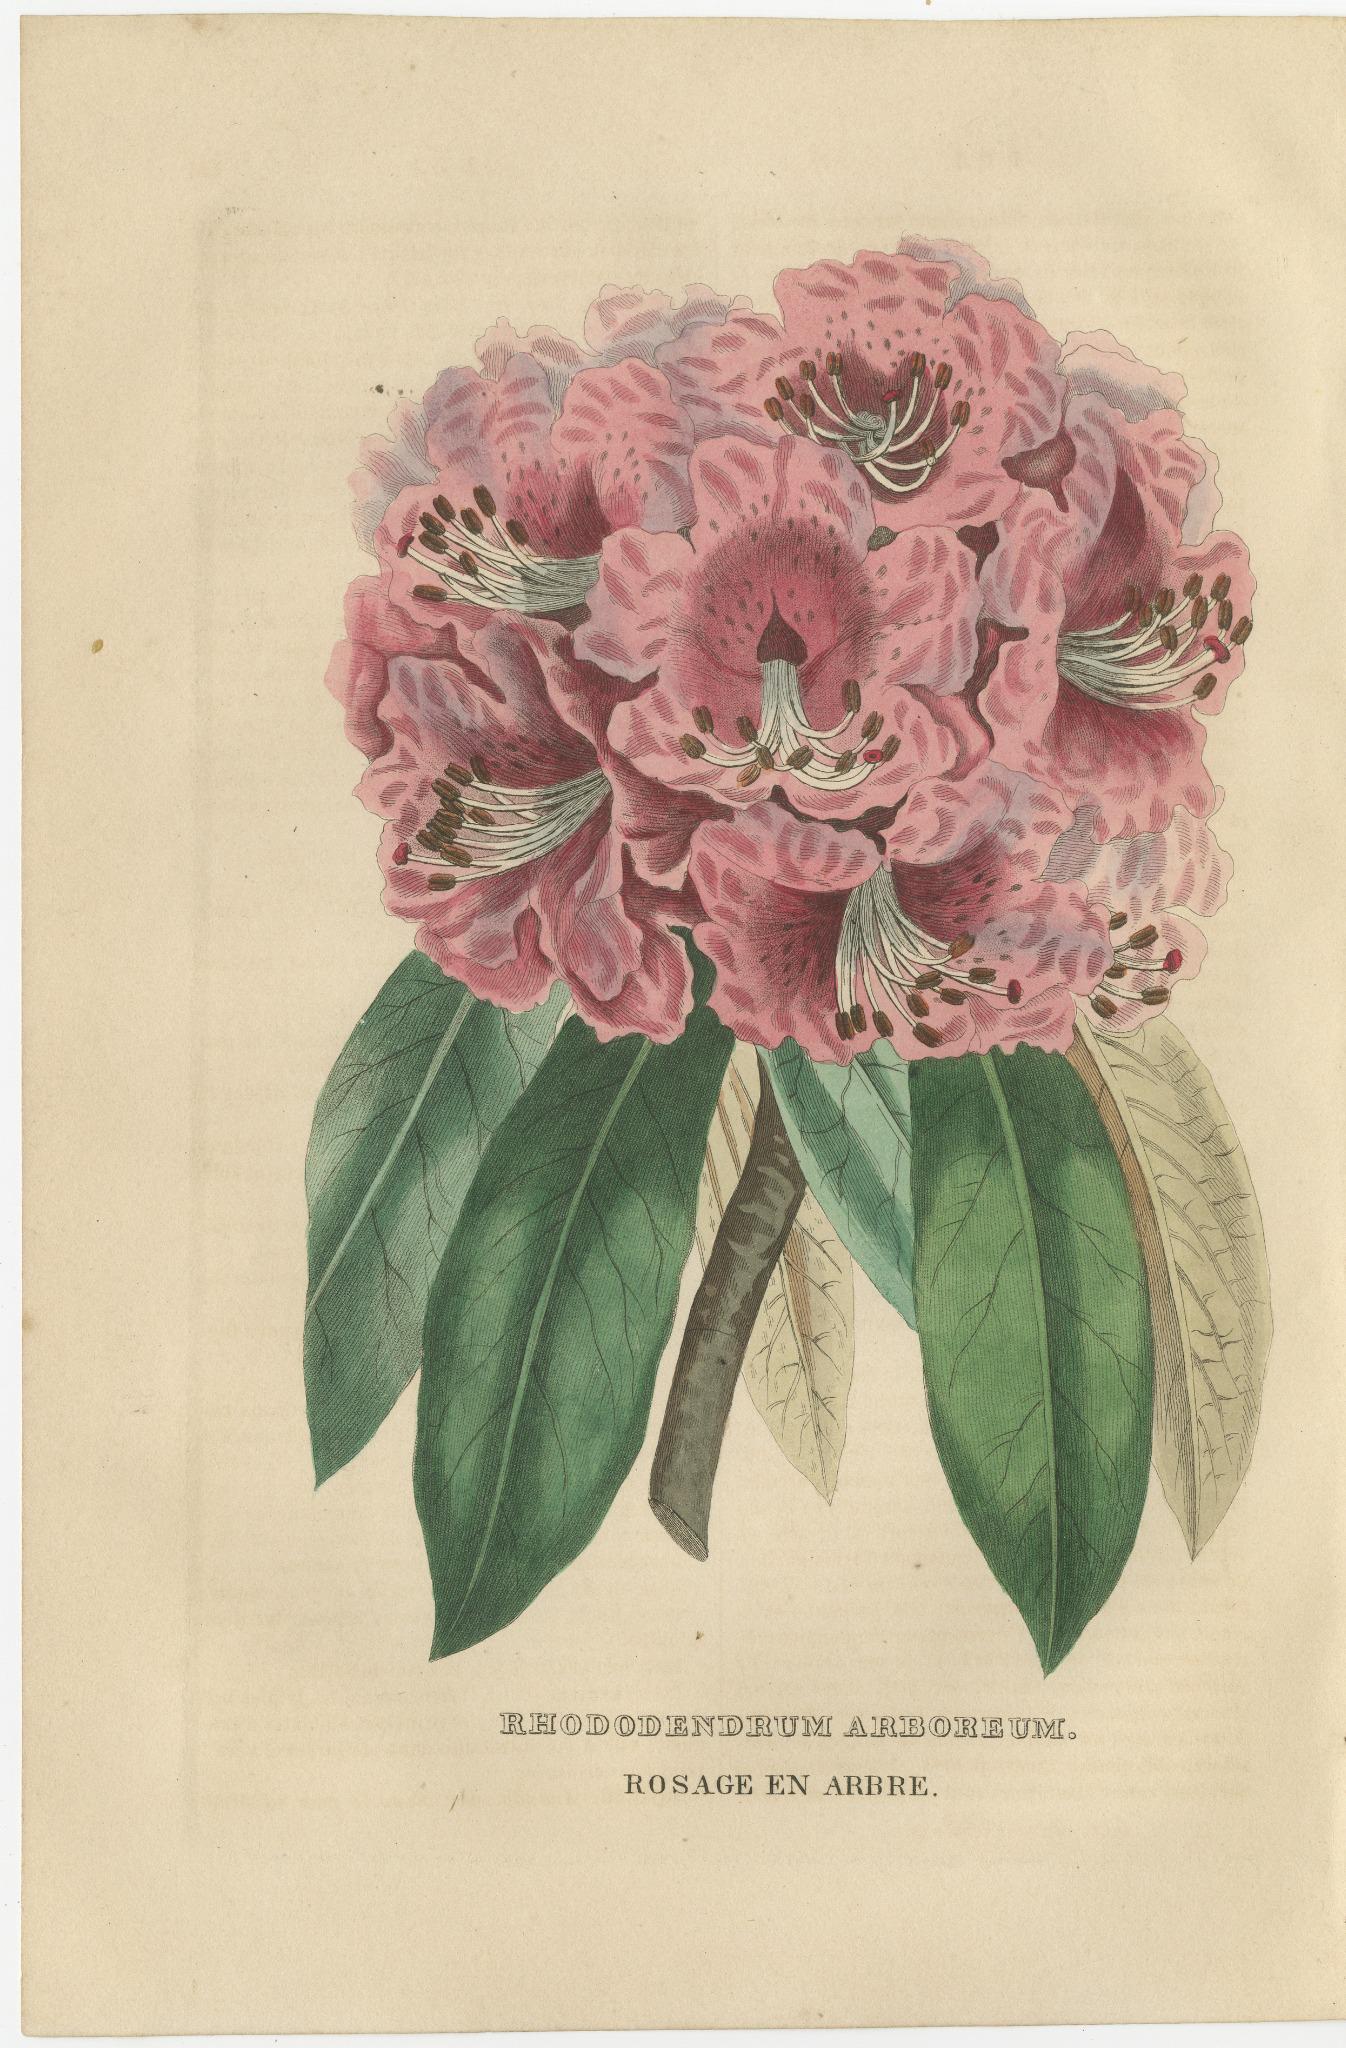 This hand-colored engraving from the 'Dictionnaire Classique des Sciences Naturelles' presents the 'Rhododendron Arboreum', commonly known as the Tree Rhododendron. The illustration is imbued with the essence of the 19th century's dedication to the